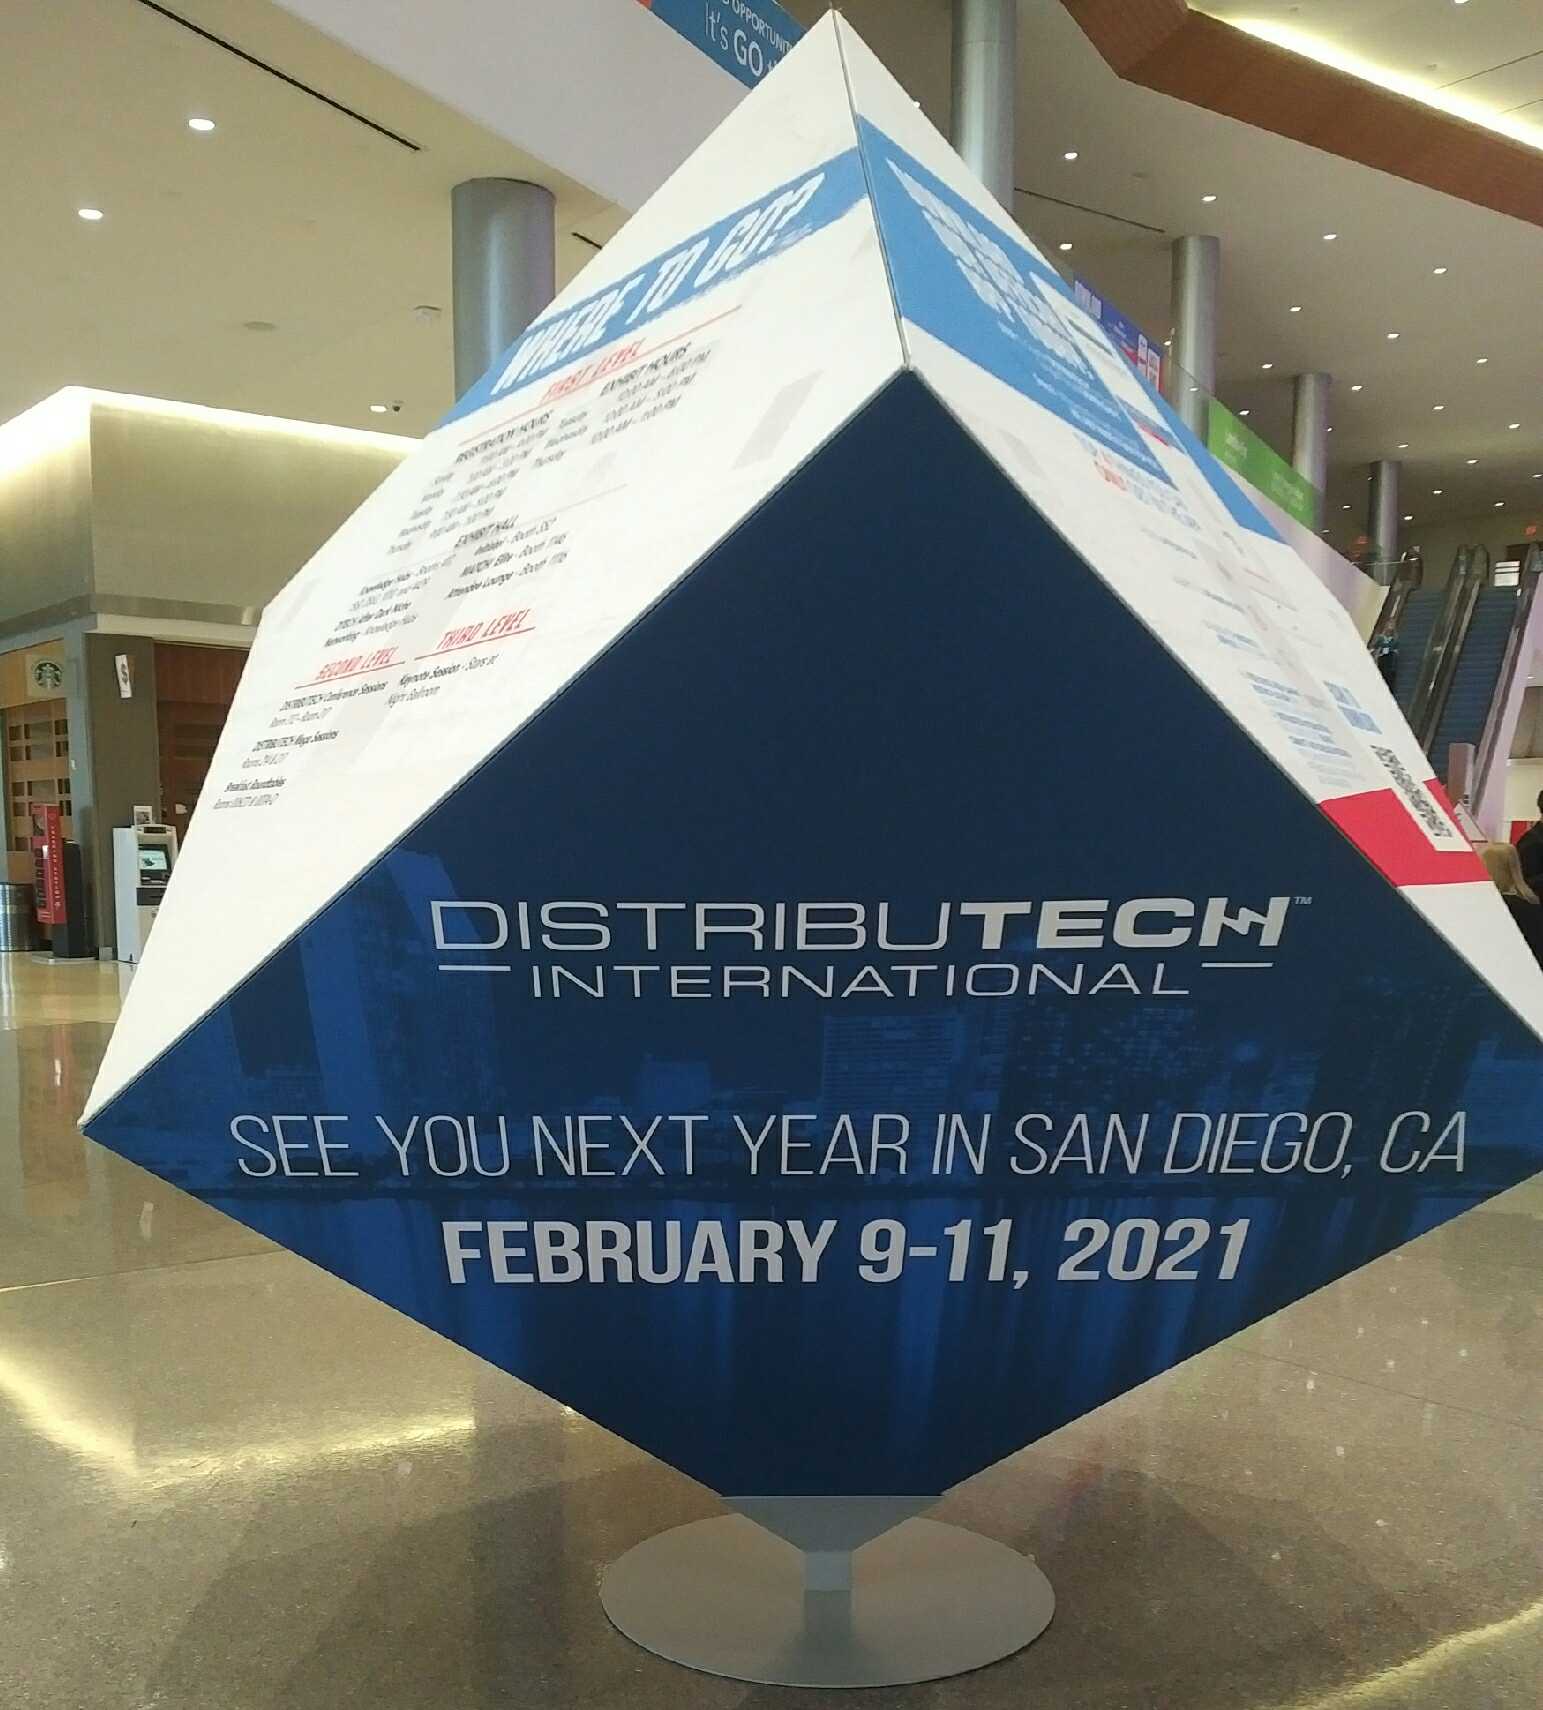 DistribuTECH 2121 will take place in San Diego, CA, February 9-11, 2021